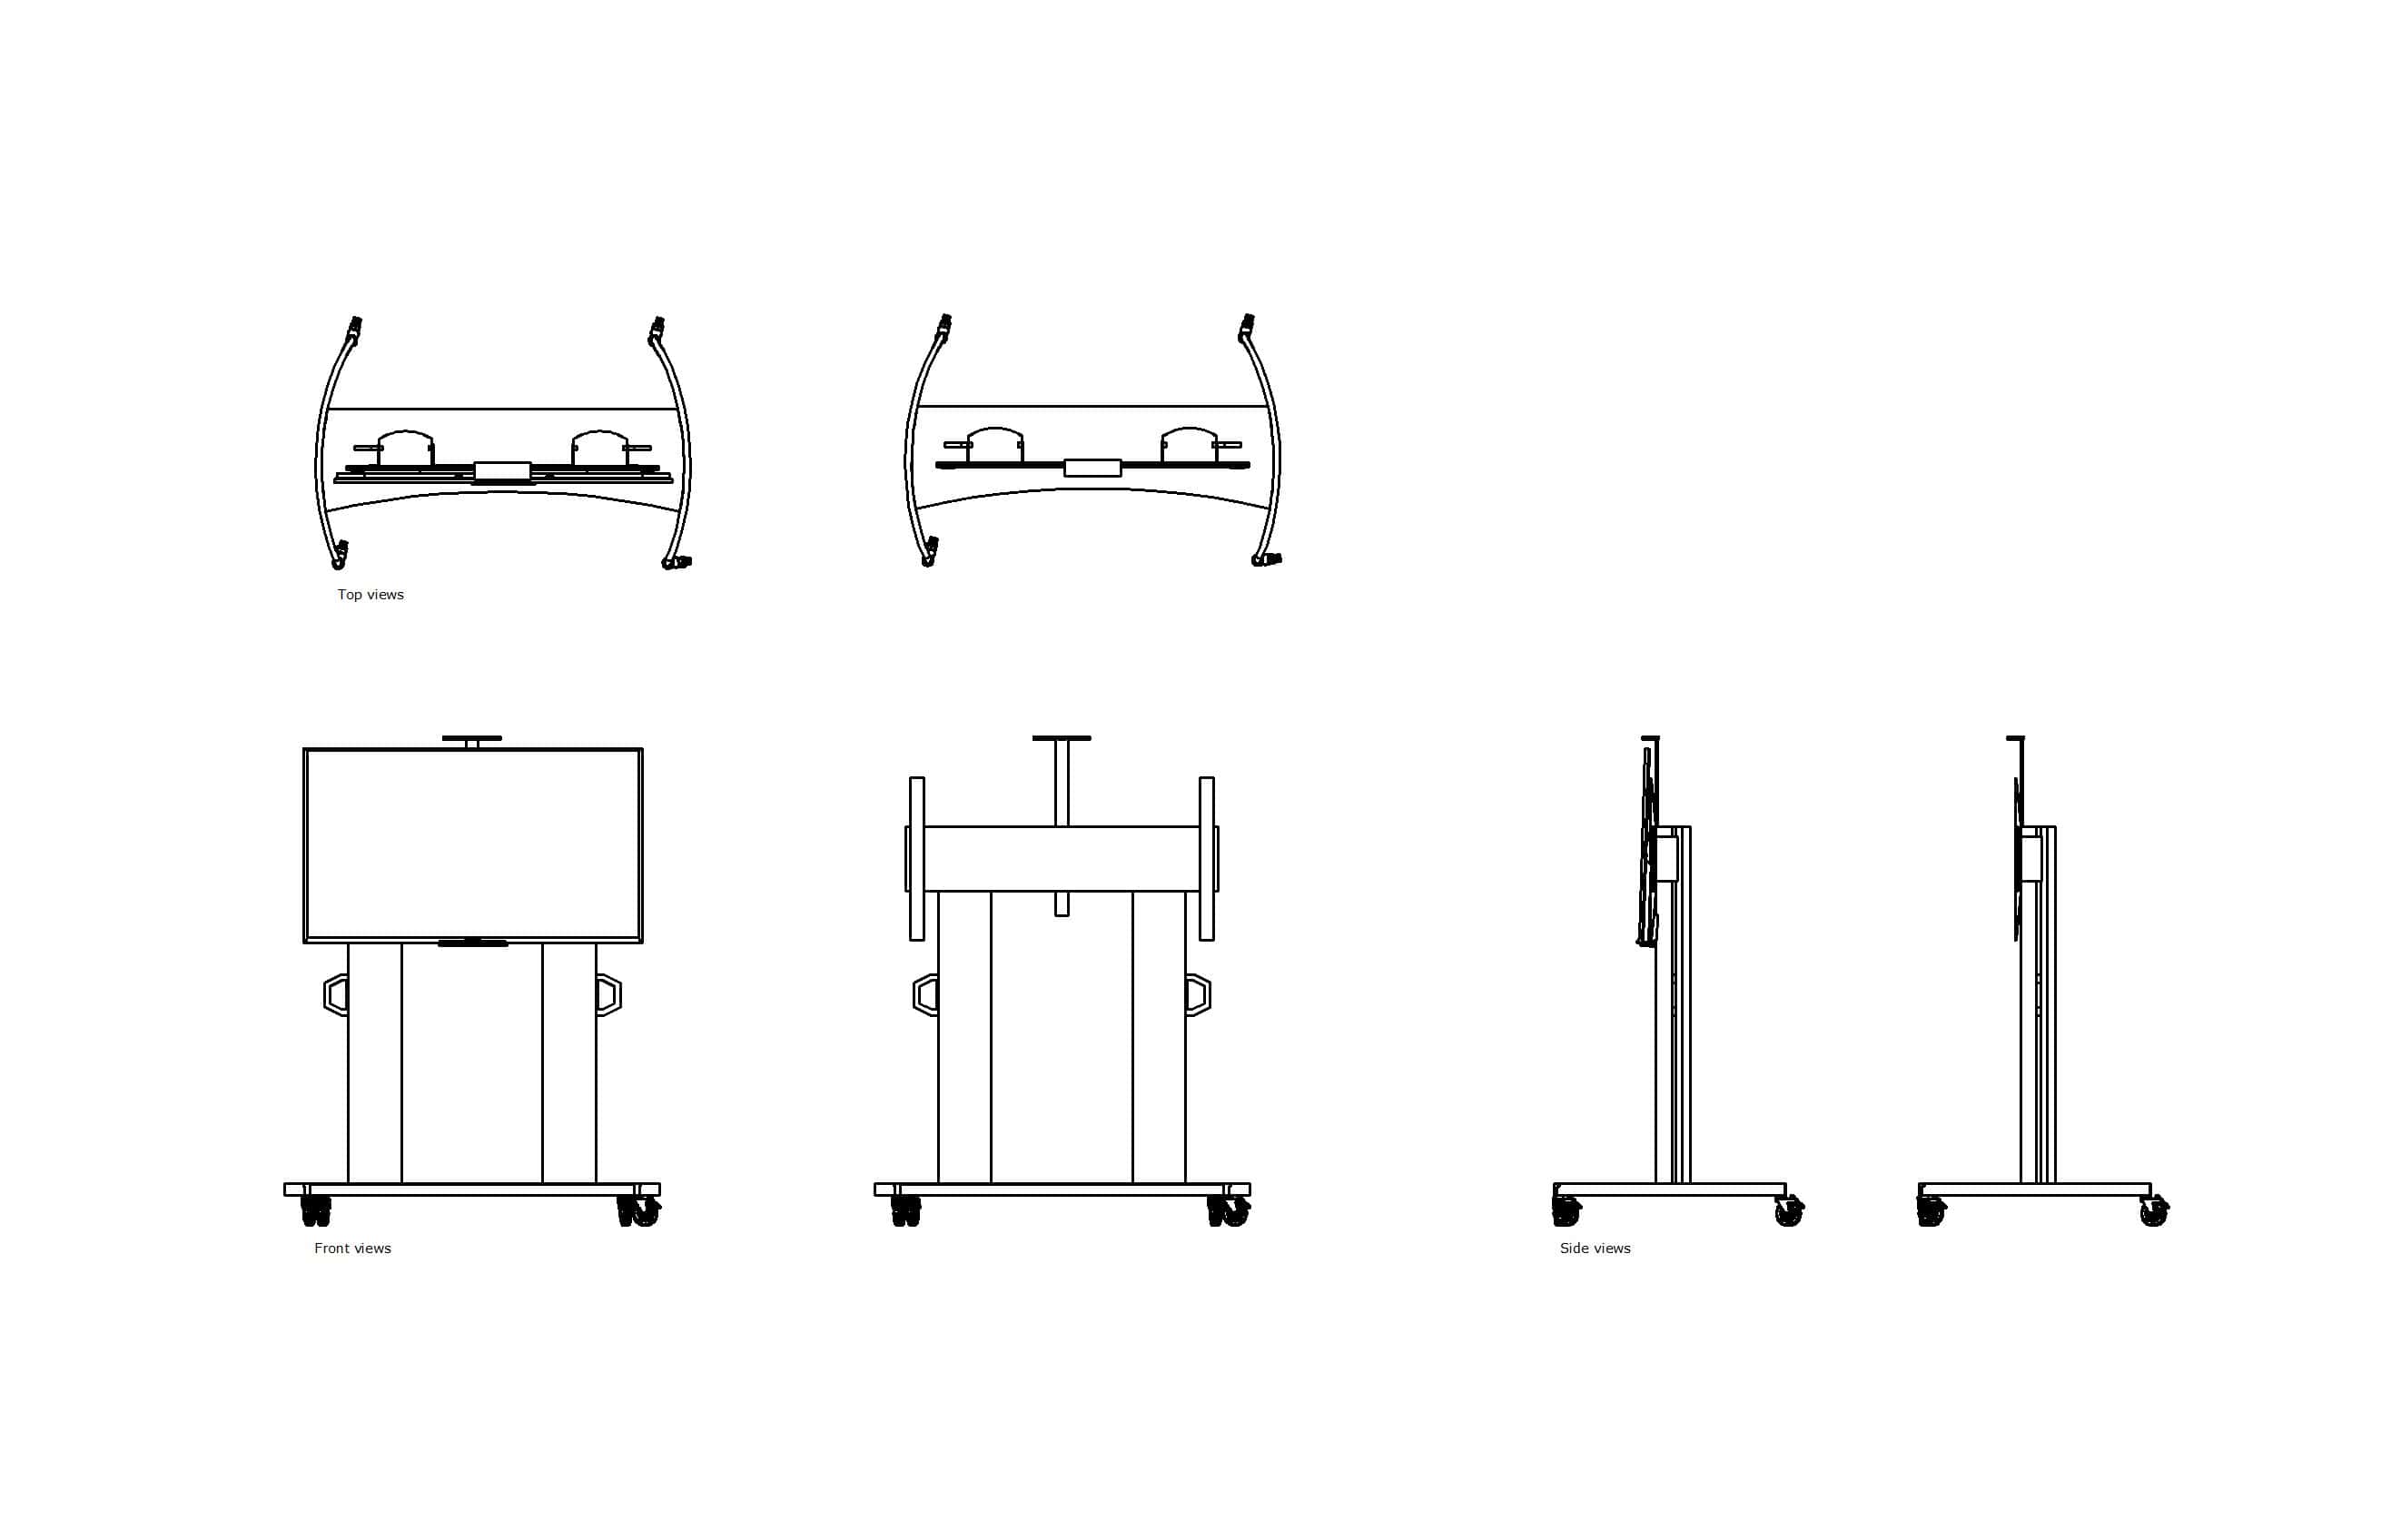 autocad drawing of a mobile TV cart, 2d views plan and elevation, dwg file free for download